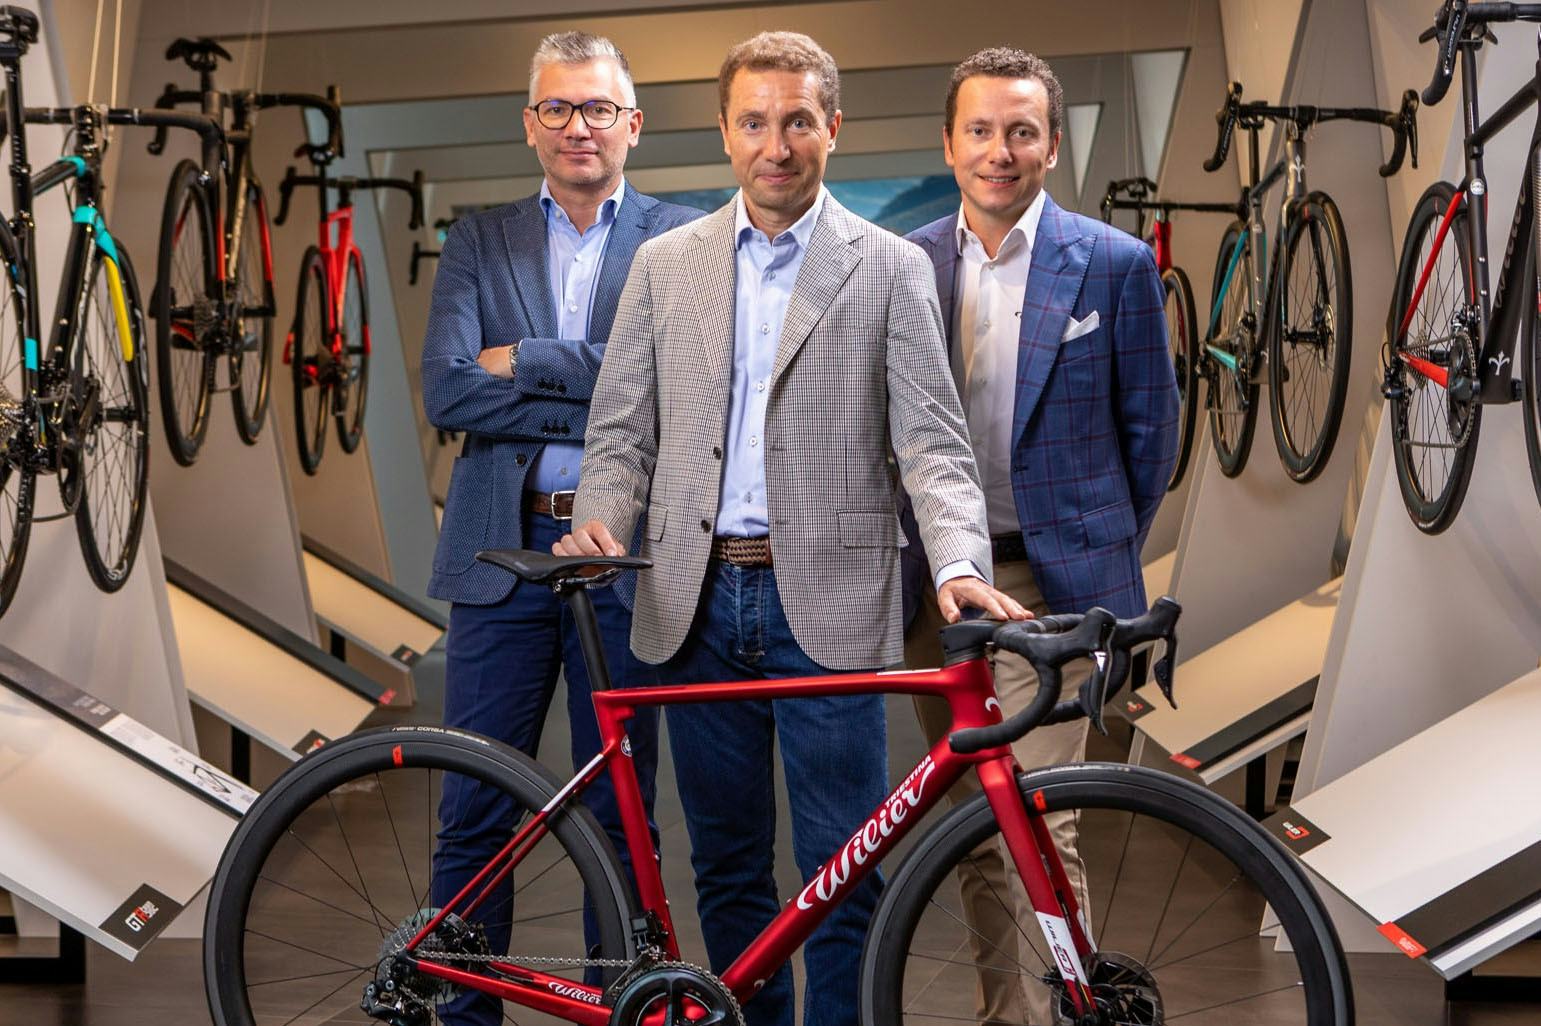 Steering the fortunes of the Wilier Triestina family business (from left to right): brothers Enrico, Michele and Andrea Gastaldello. - Photo Wilier Triestina 